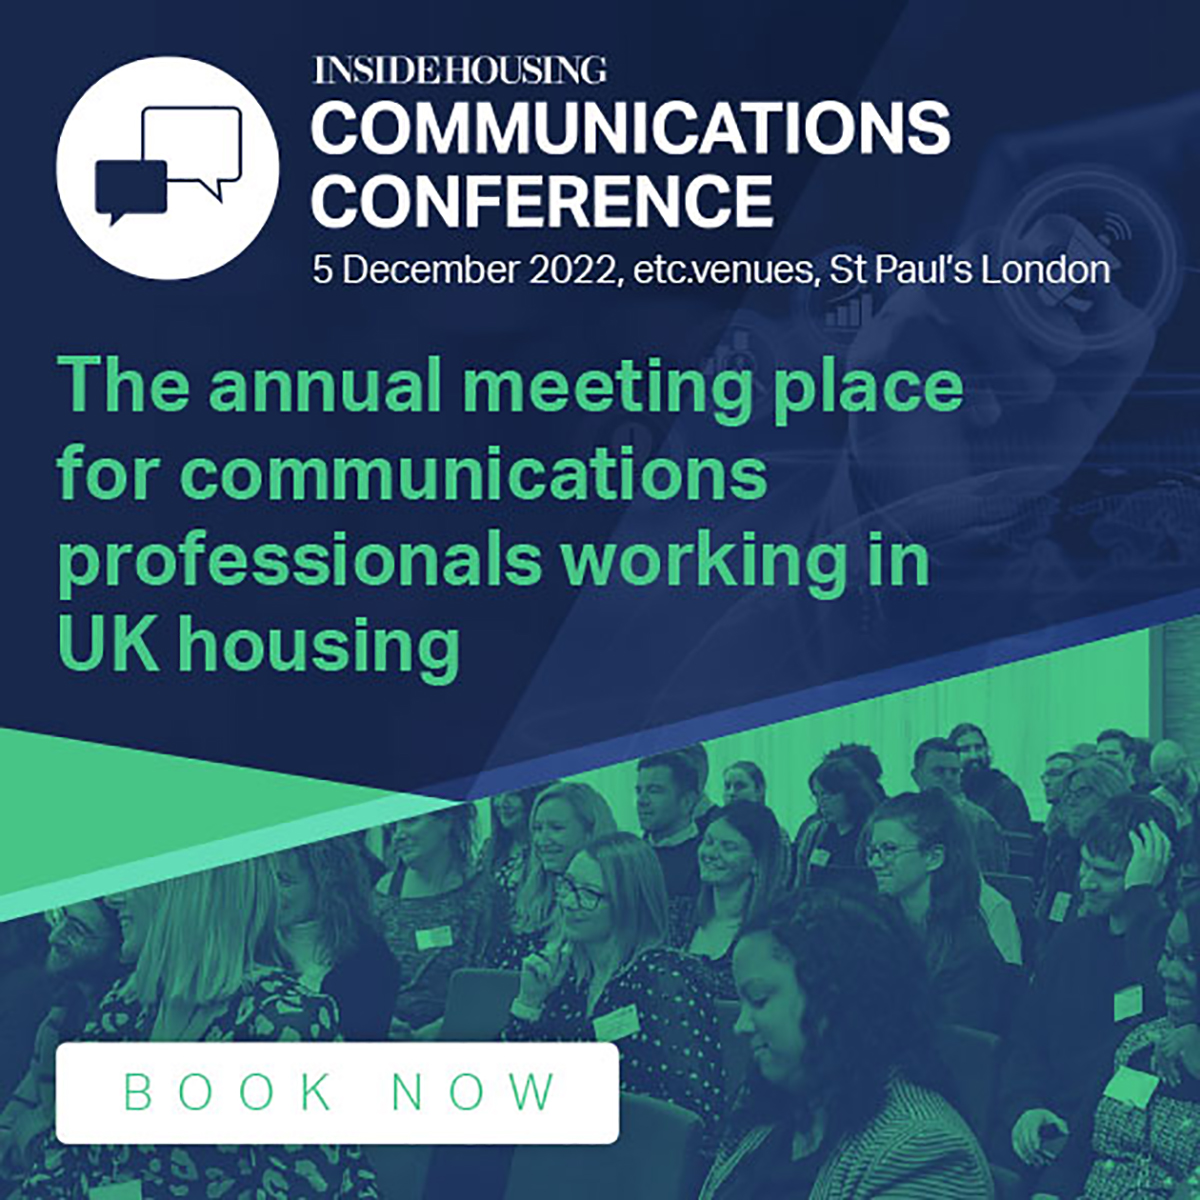 Register for the Inside Housing Communications Conference 